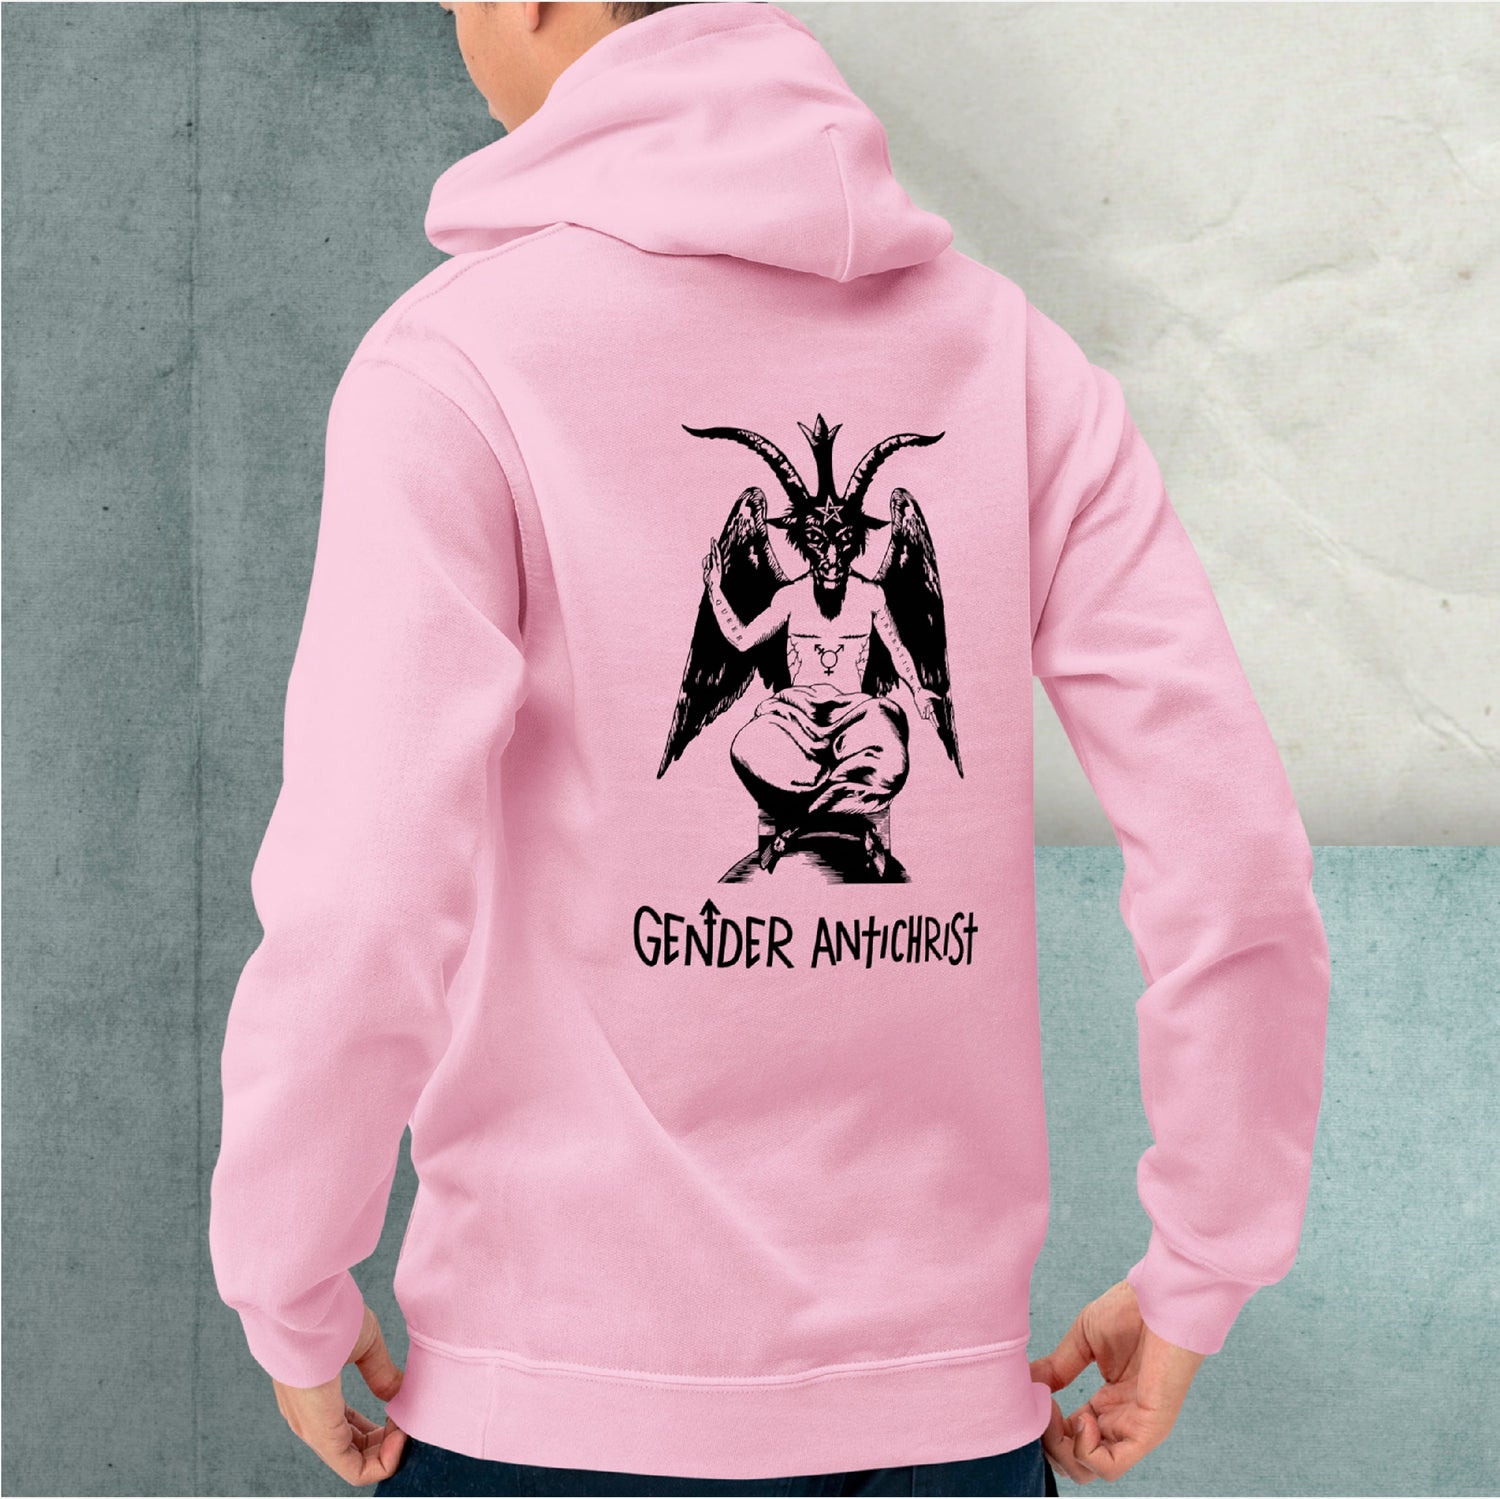 A model wearing a pink hoodie with an illustration on the back of Baphomet with top surgery scars, a trans symbol chest tattoo and the words queer and liberation tattooed on their right and left arms respectively. Below is text reading Gender Antichrist